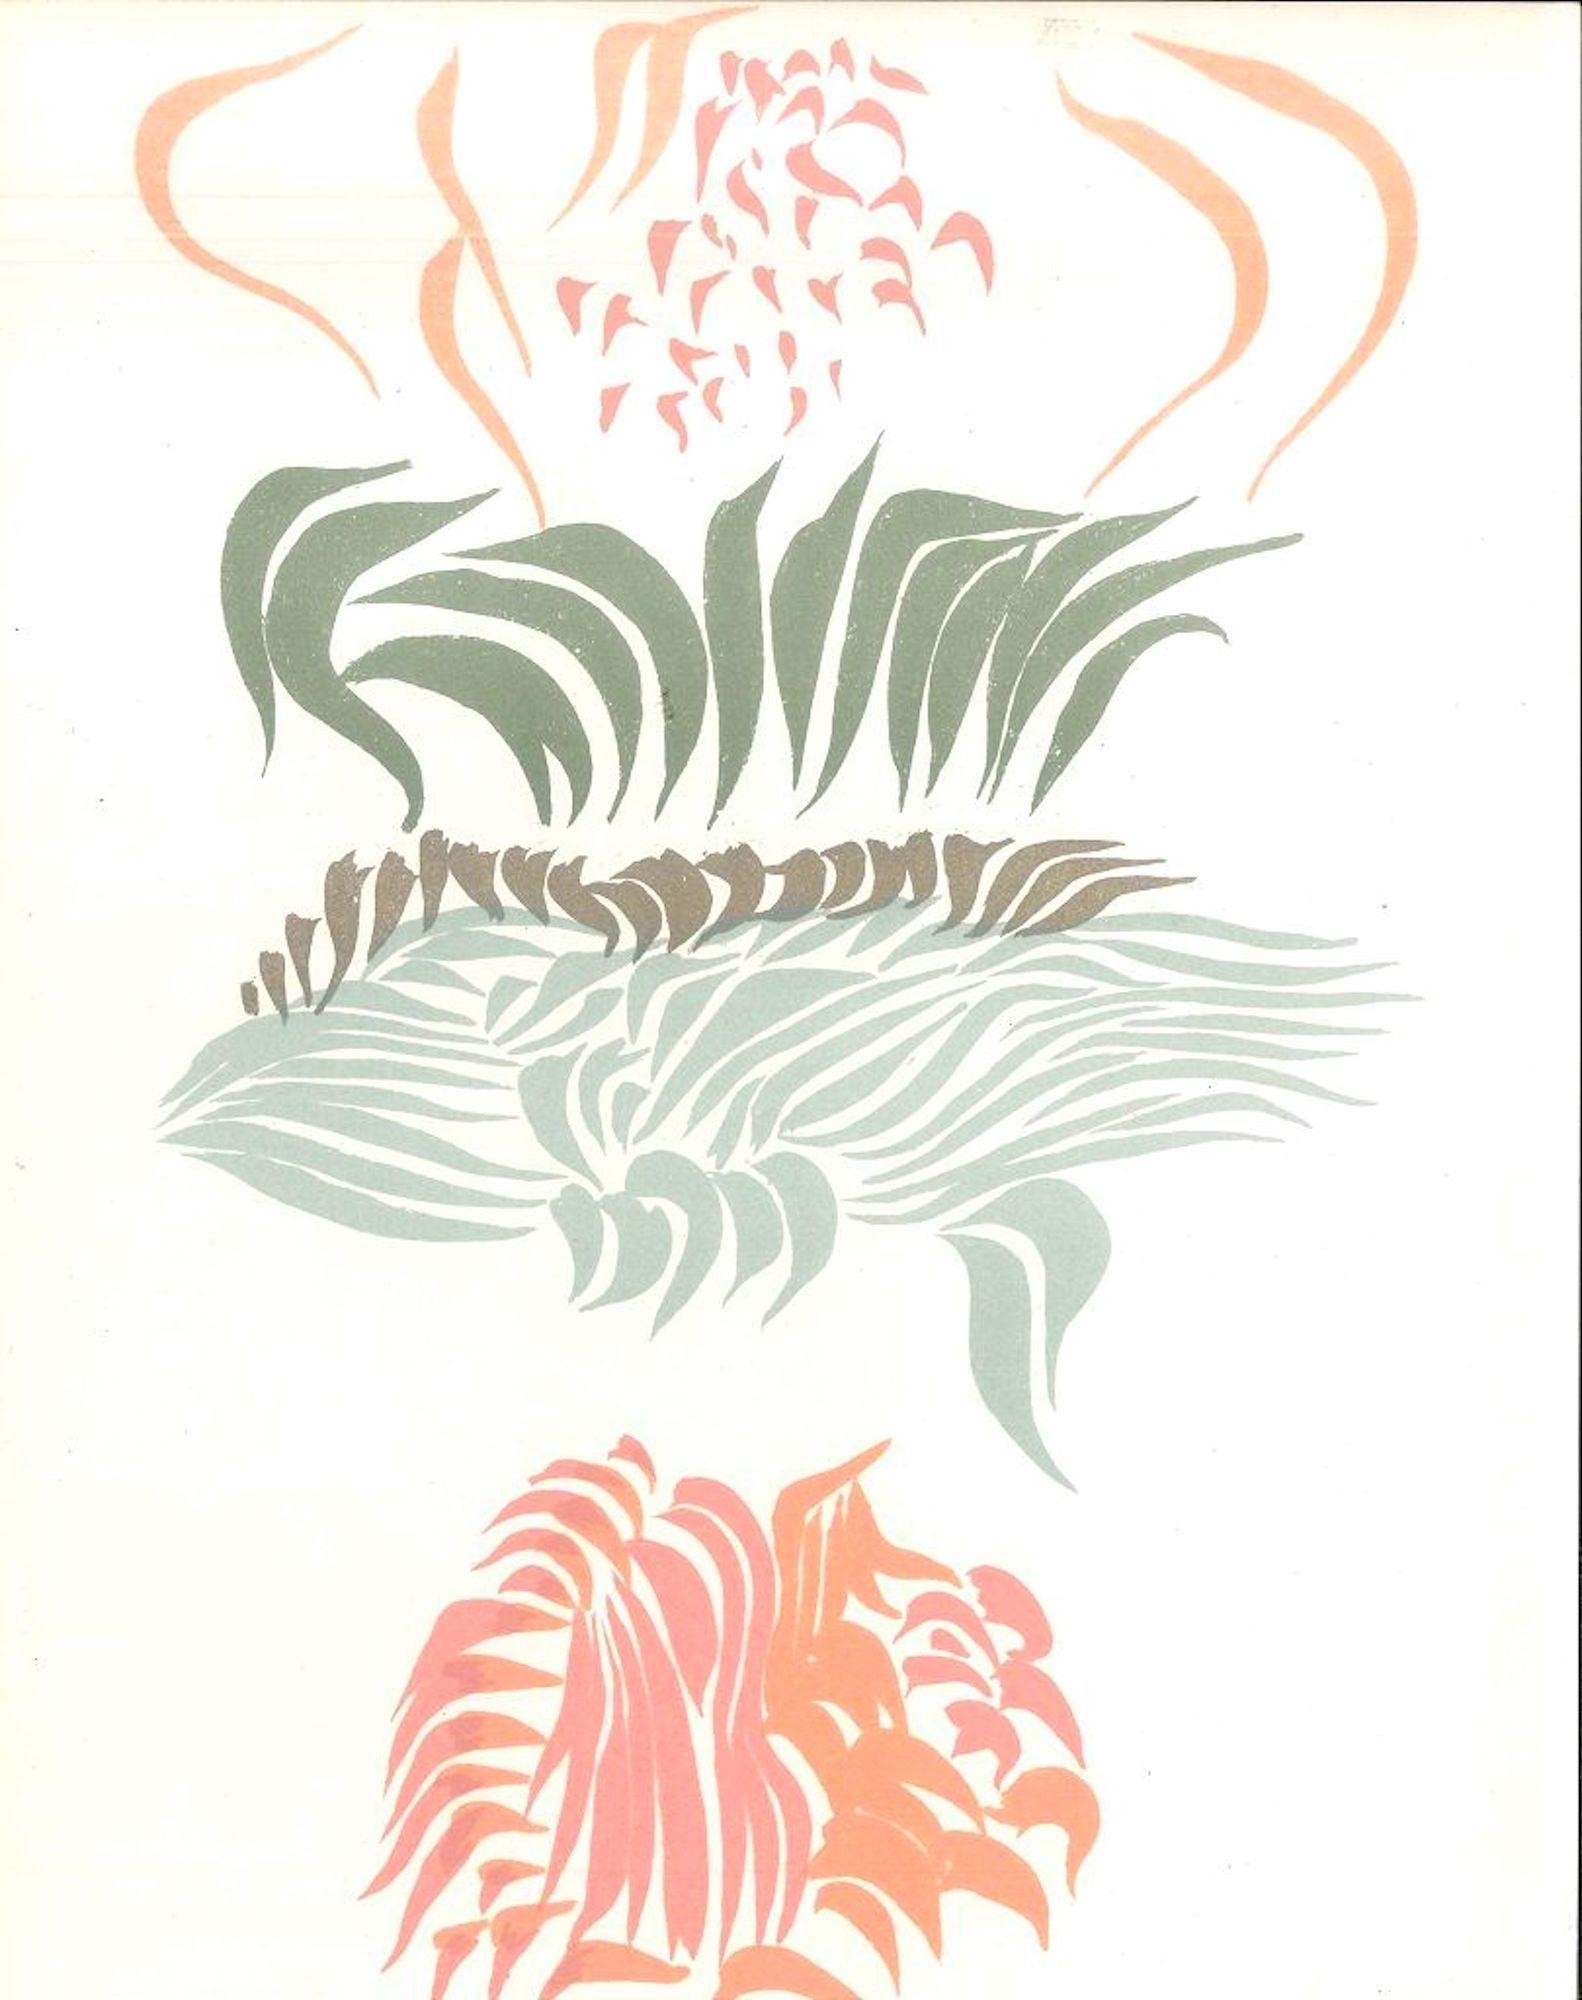 Untitled - lithograph by J. Hérold - 1974